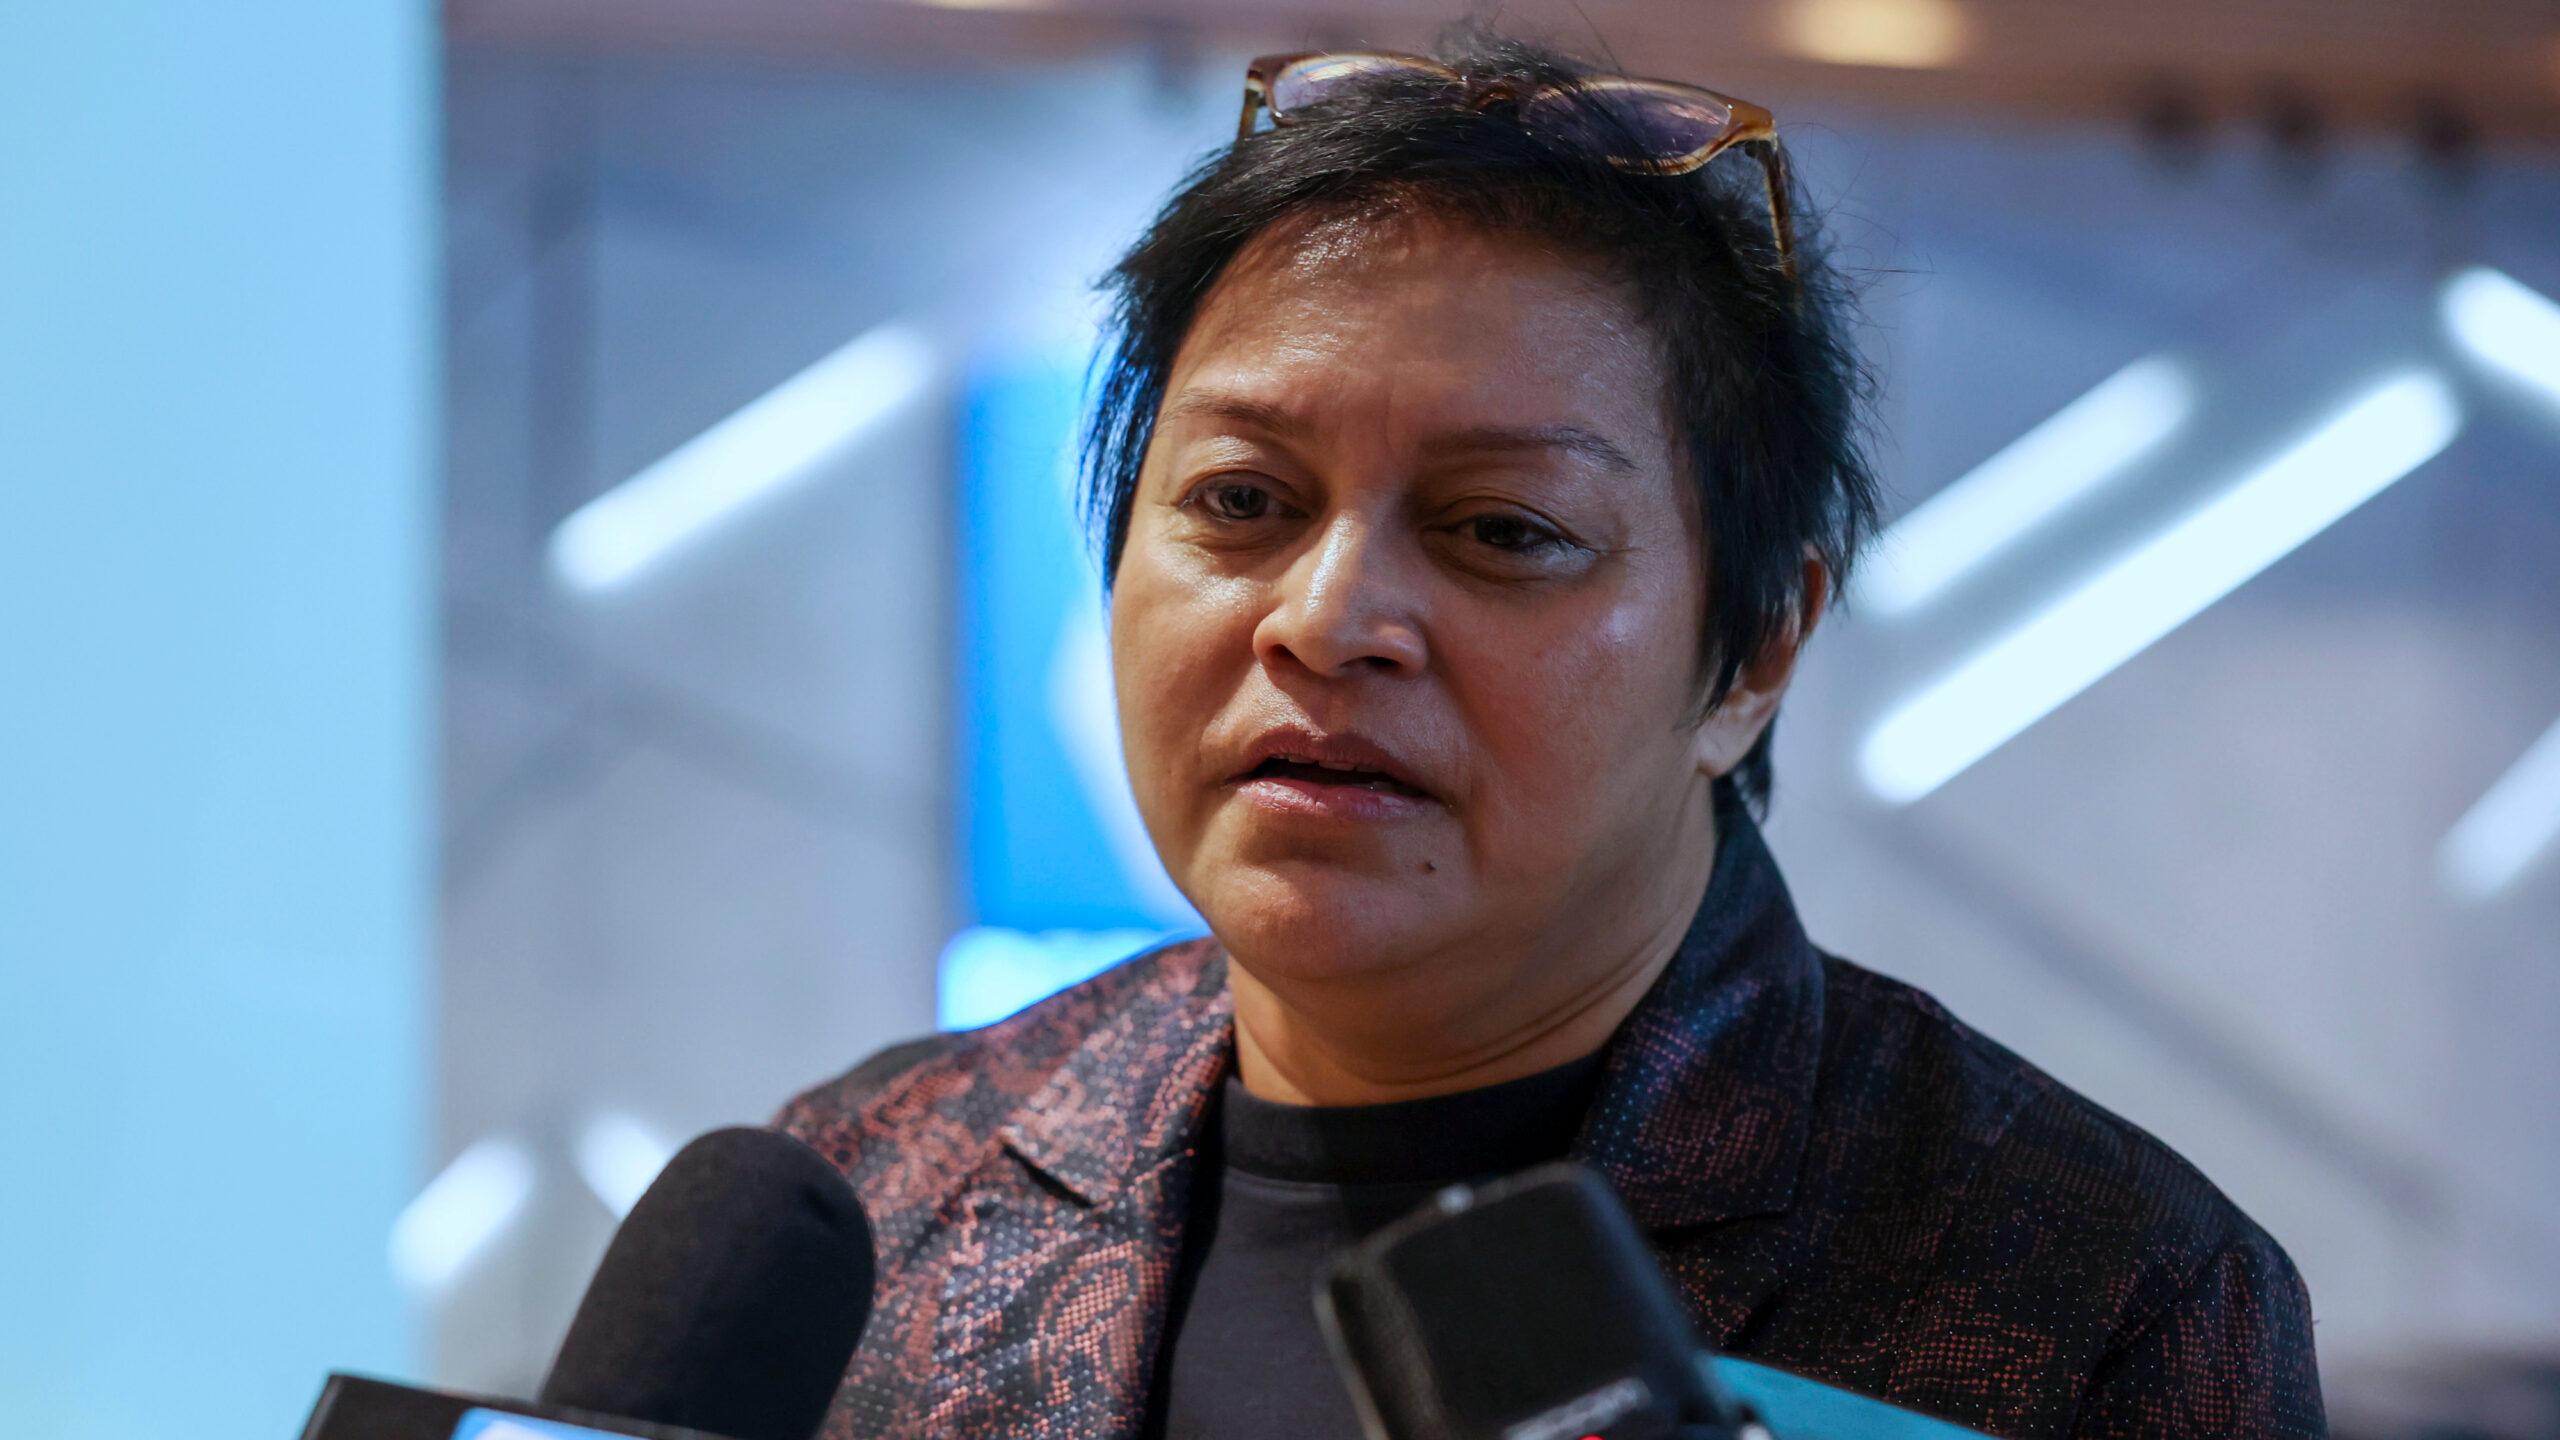 Sulu Sultanate case: Madrid’s appeals court dismisses ‘rogue’ arbitrator Stampa’s contempt of court charge, says Azalina